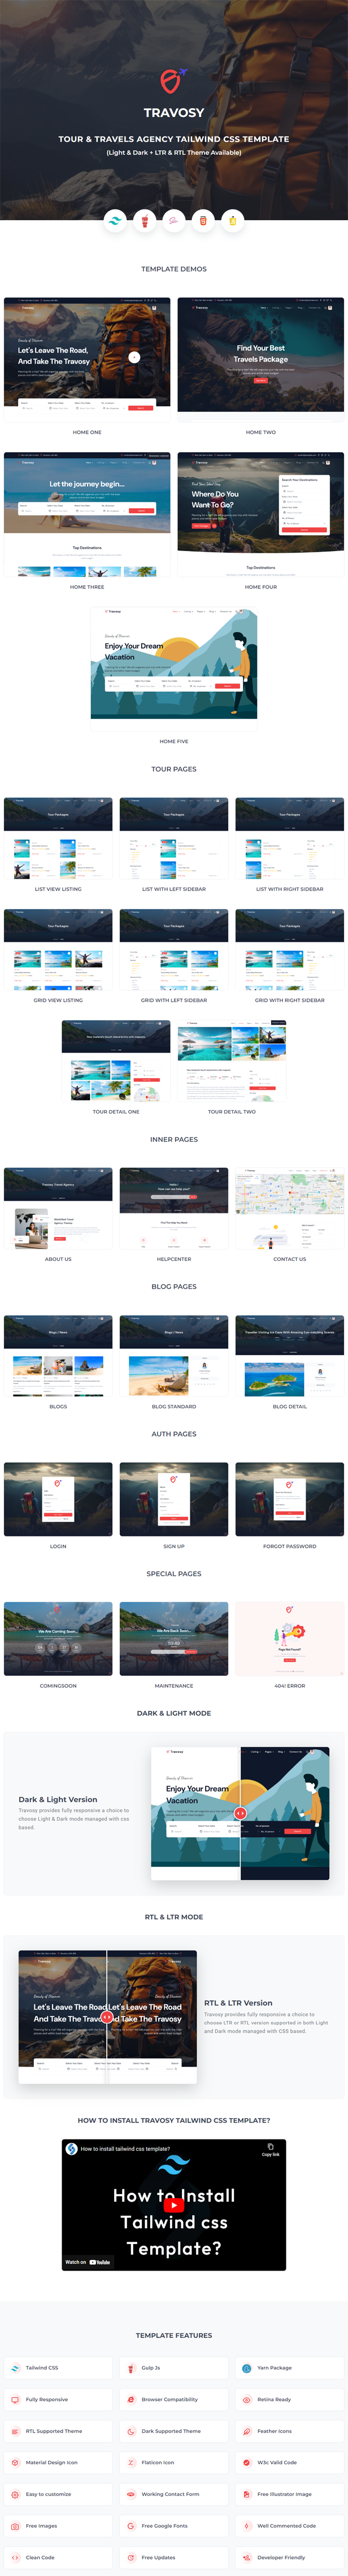 Travosy - Tour & Travel Agency Tailwind CSS HTML Template - 2